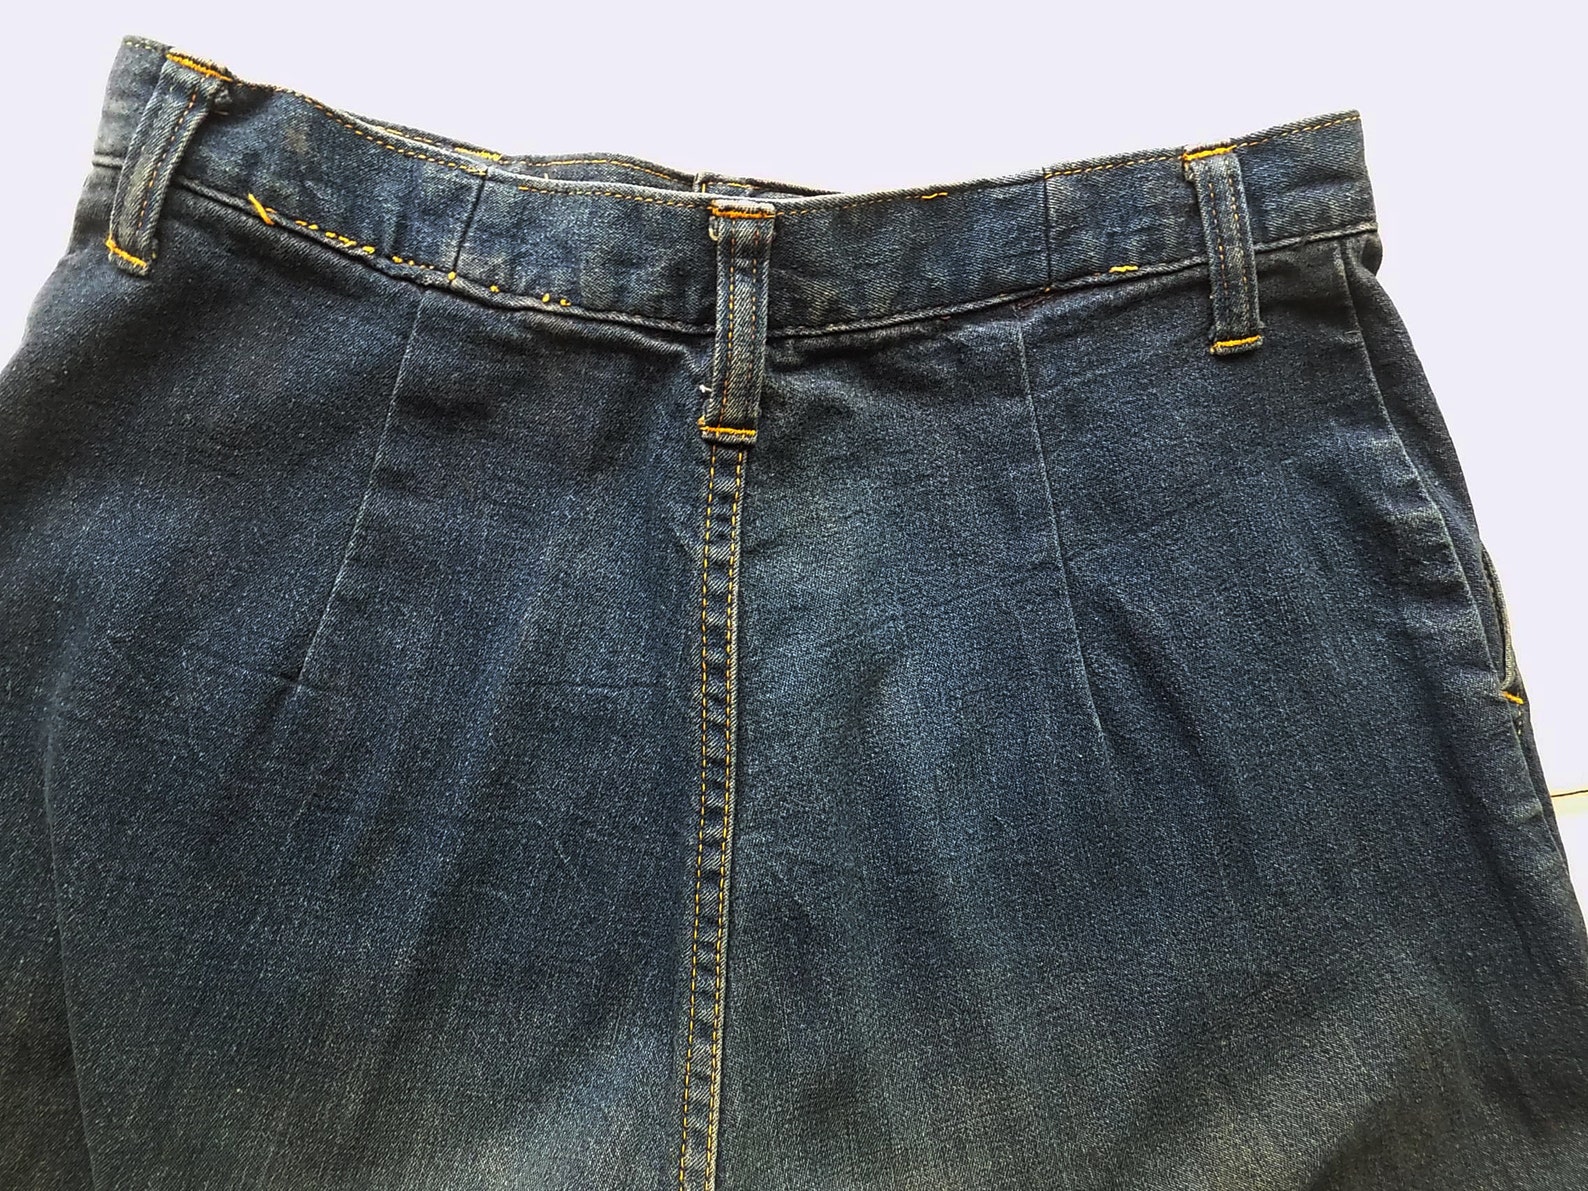 1950s-60s RARE Woman's Jeans by SEARS / Large Patch - Etsy